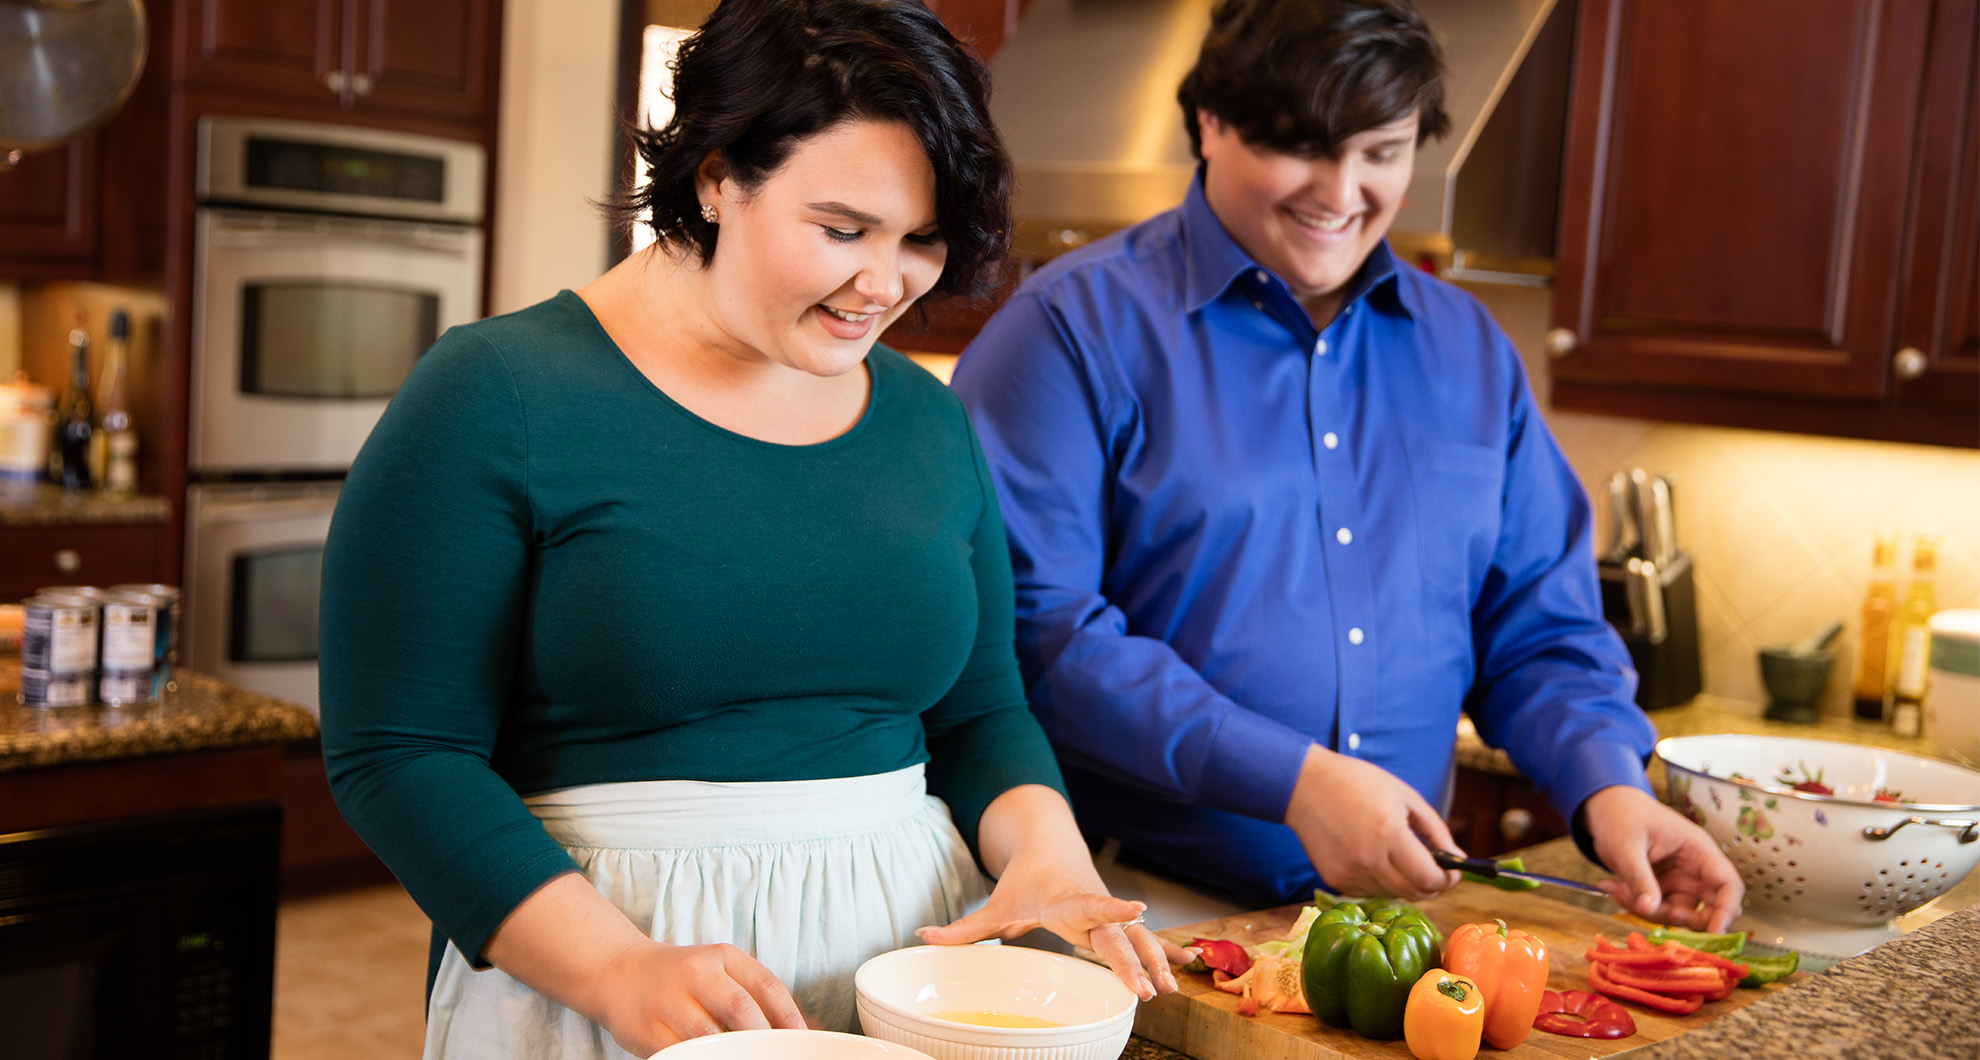 <p>A new study by Univerity of Florida researchers found patients need continued support to help them maintain weight loss and other health benefits of bariatric surgery. Photo credit: Obesity Action Coalition.</p>